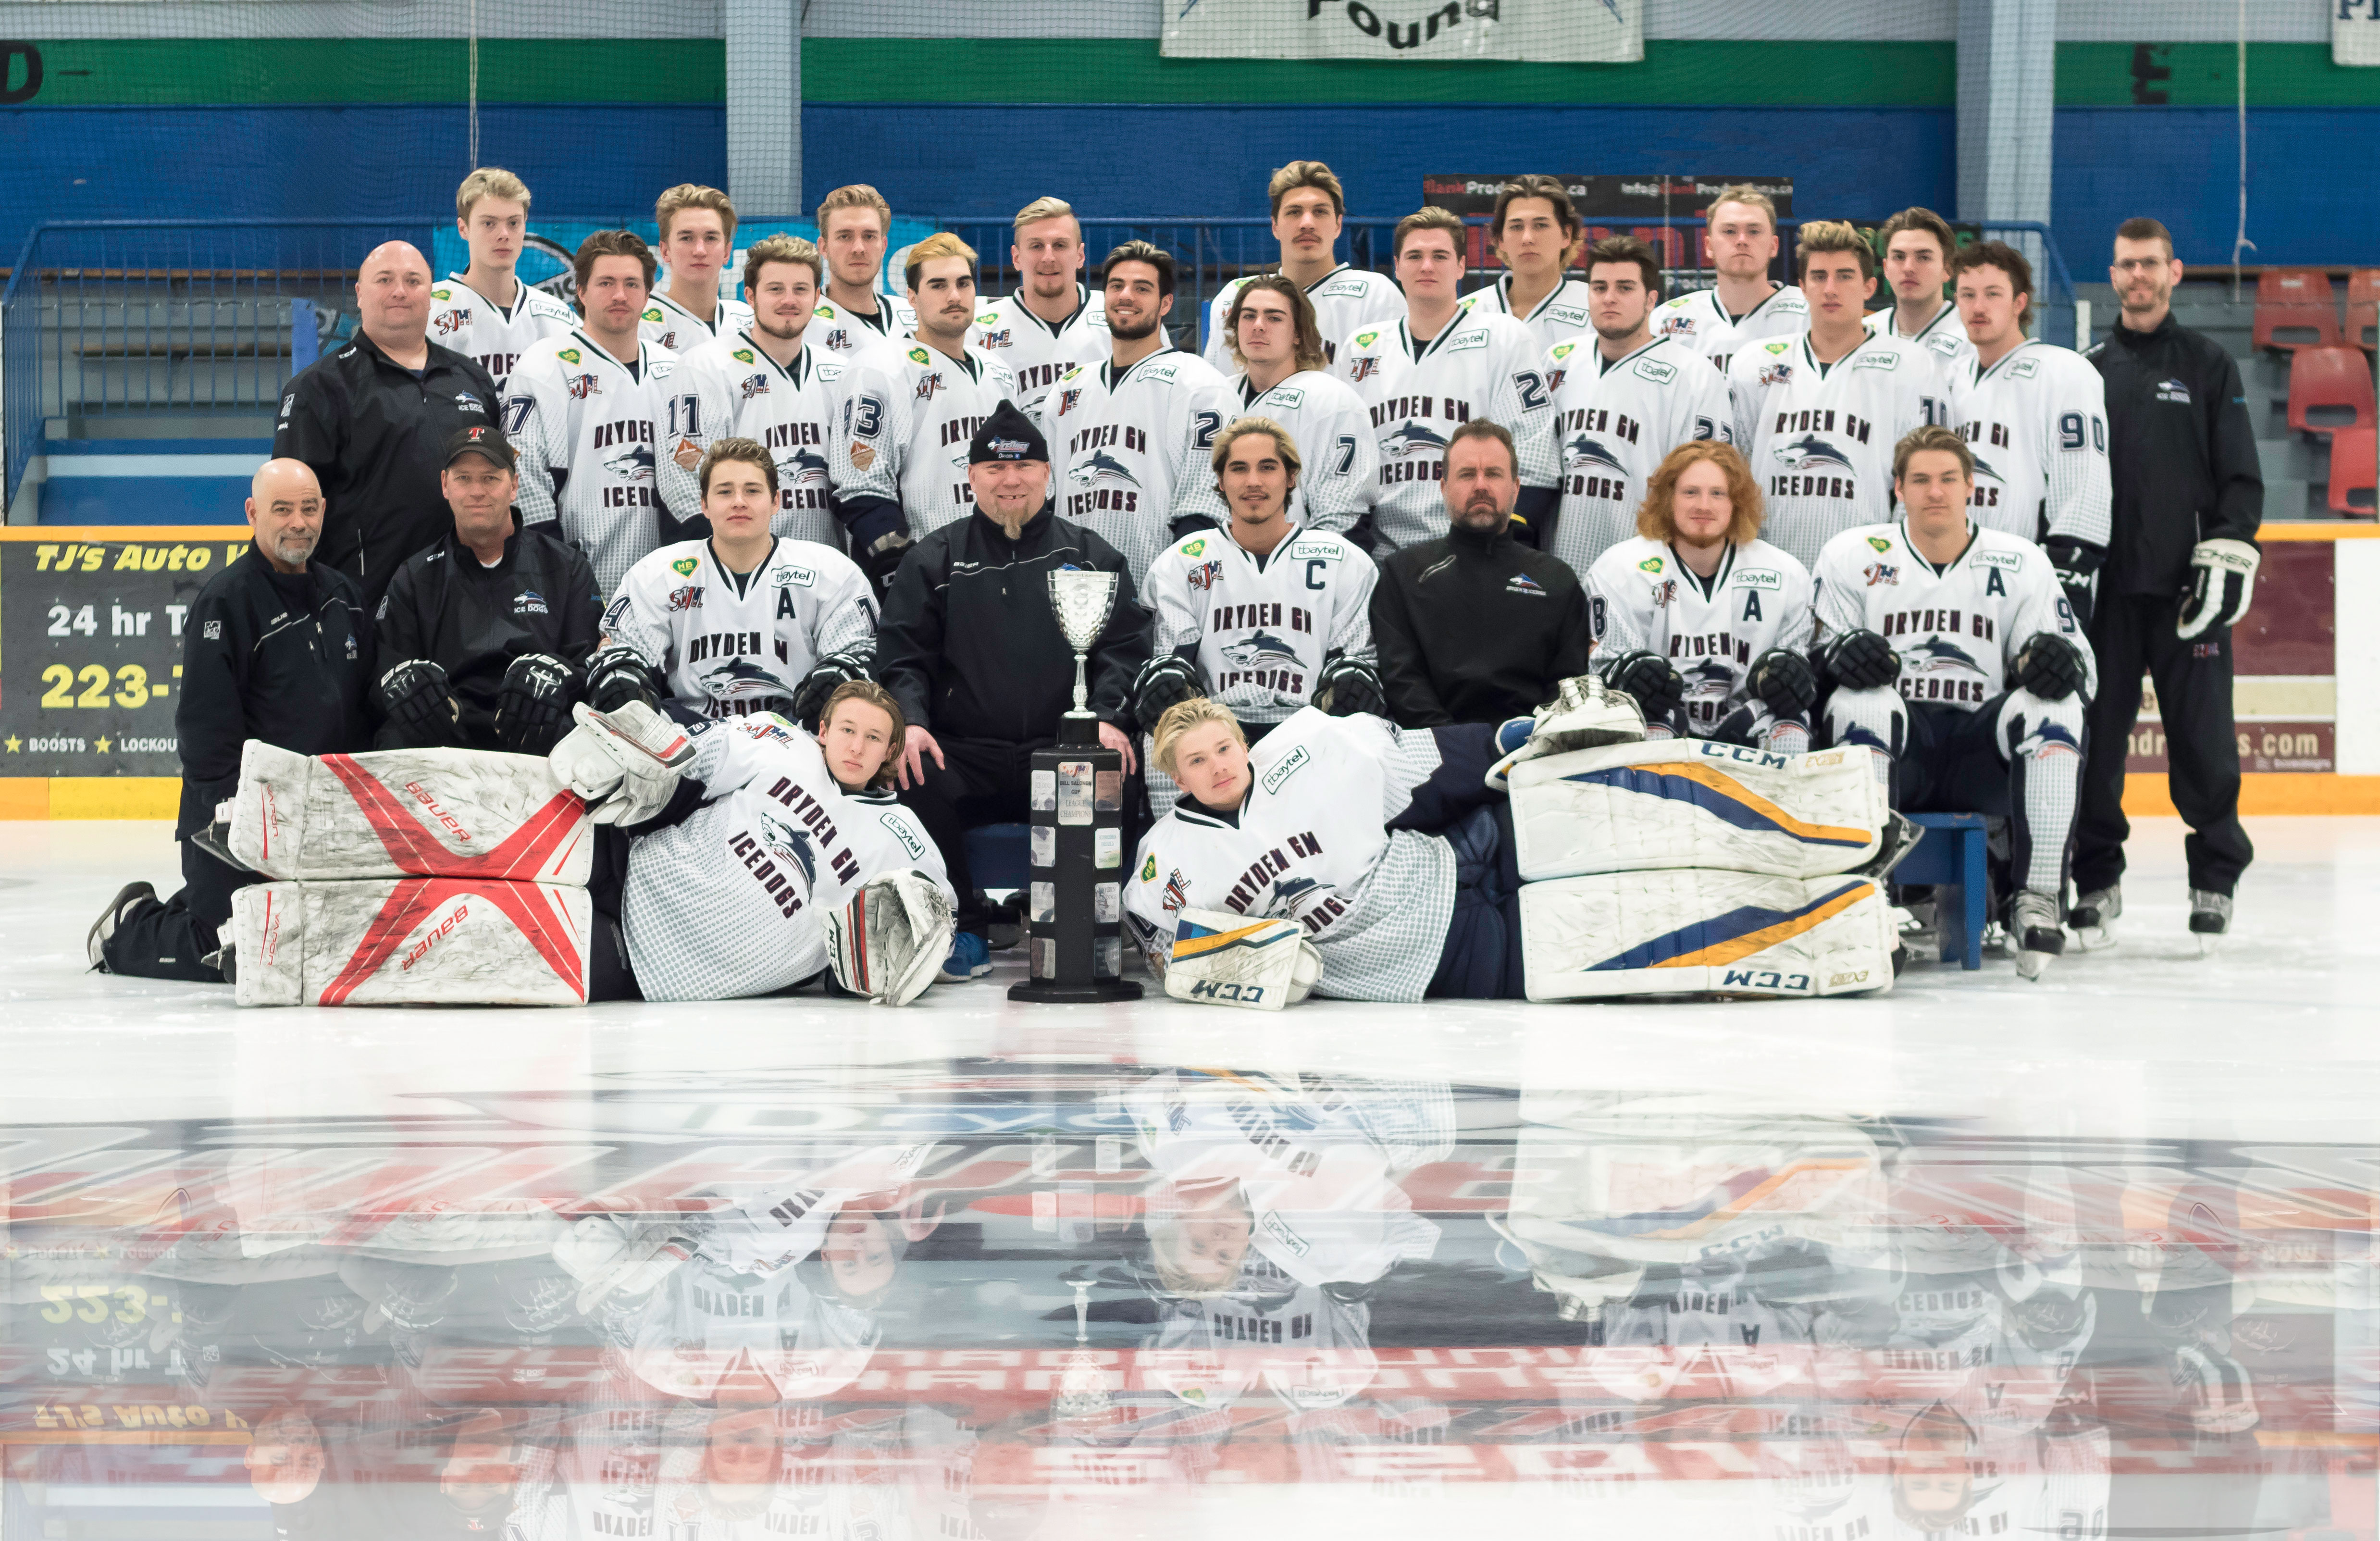 Image shows hockey players gathered for a team photo. 